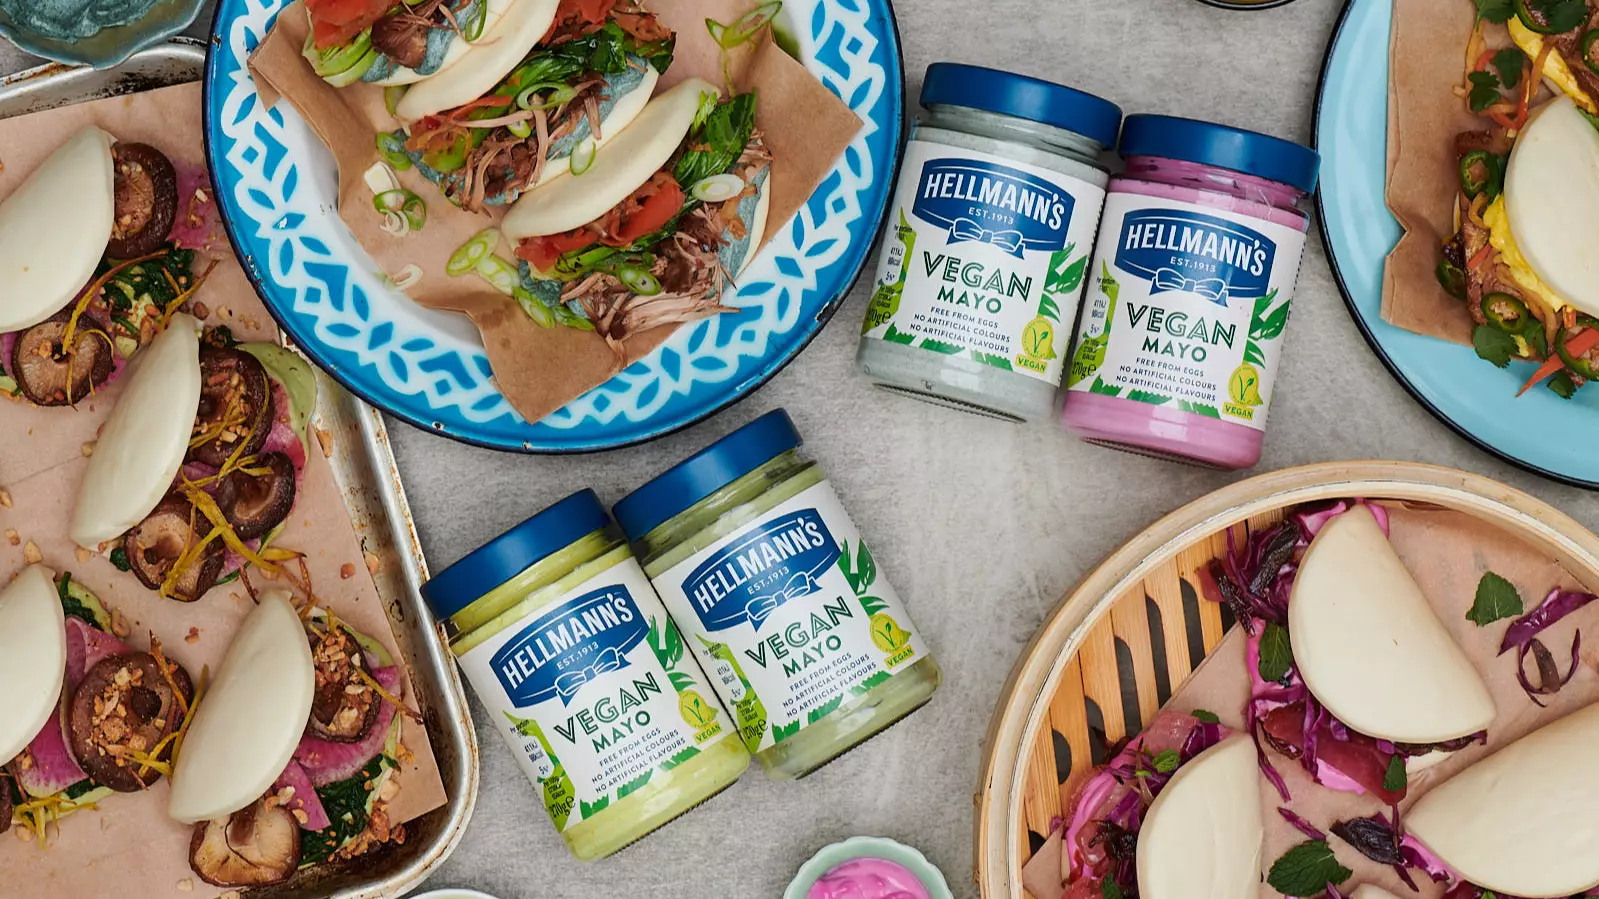 Hellmann's Introduces Colourful Vegan Mayo To Brighten Up January